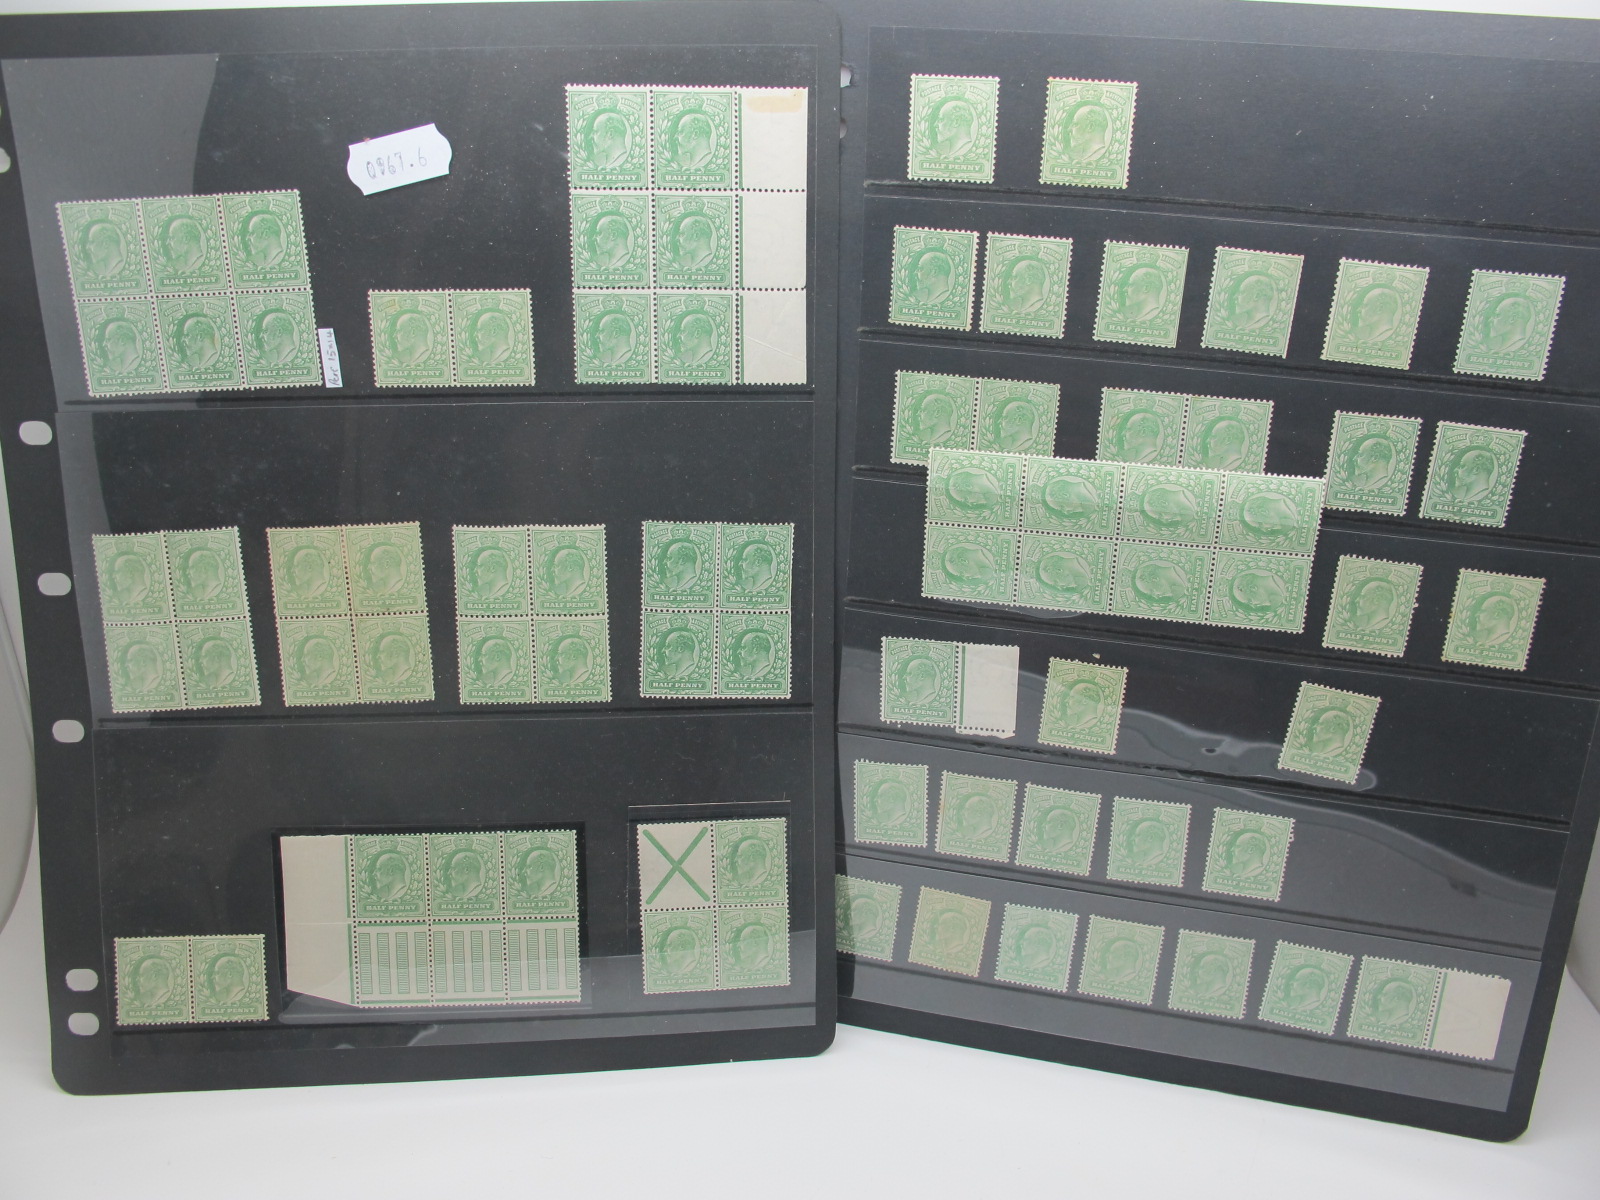 G.B King EDVII ½d Green Collection, on five stock sheets, includes examples from various printers,